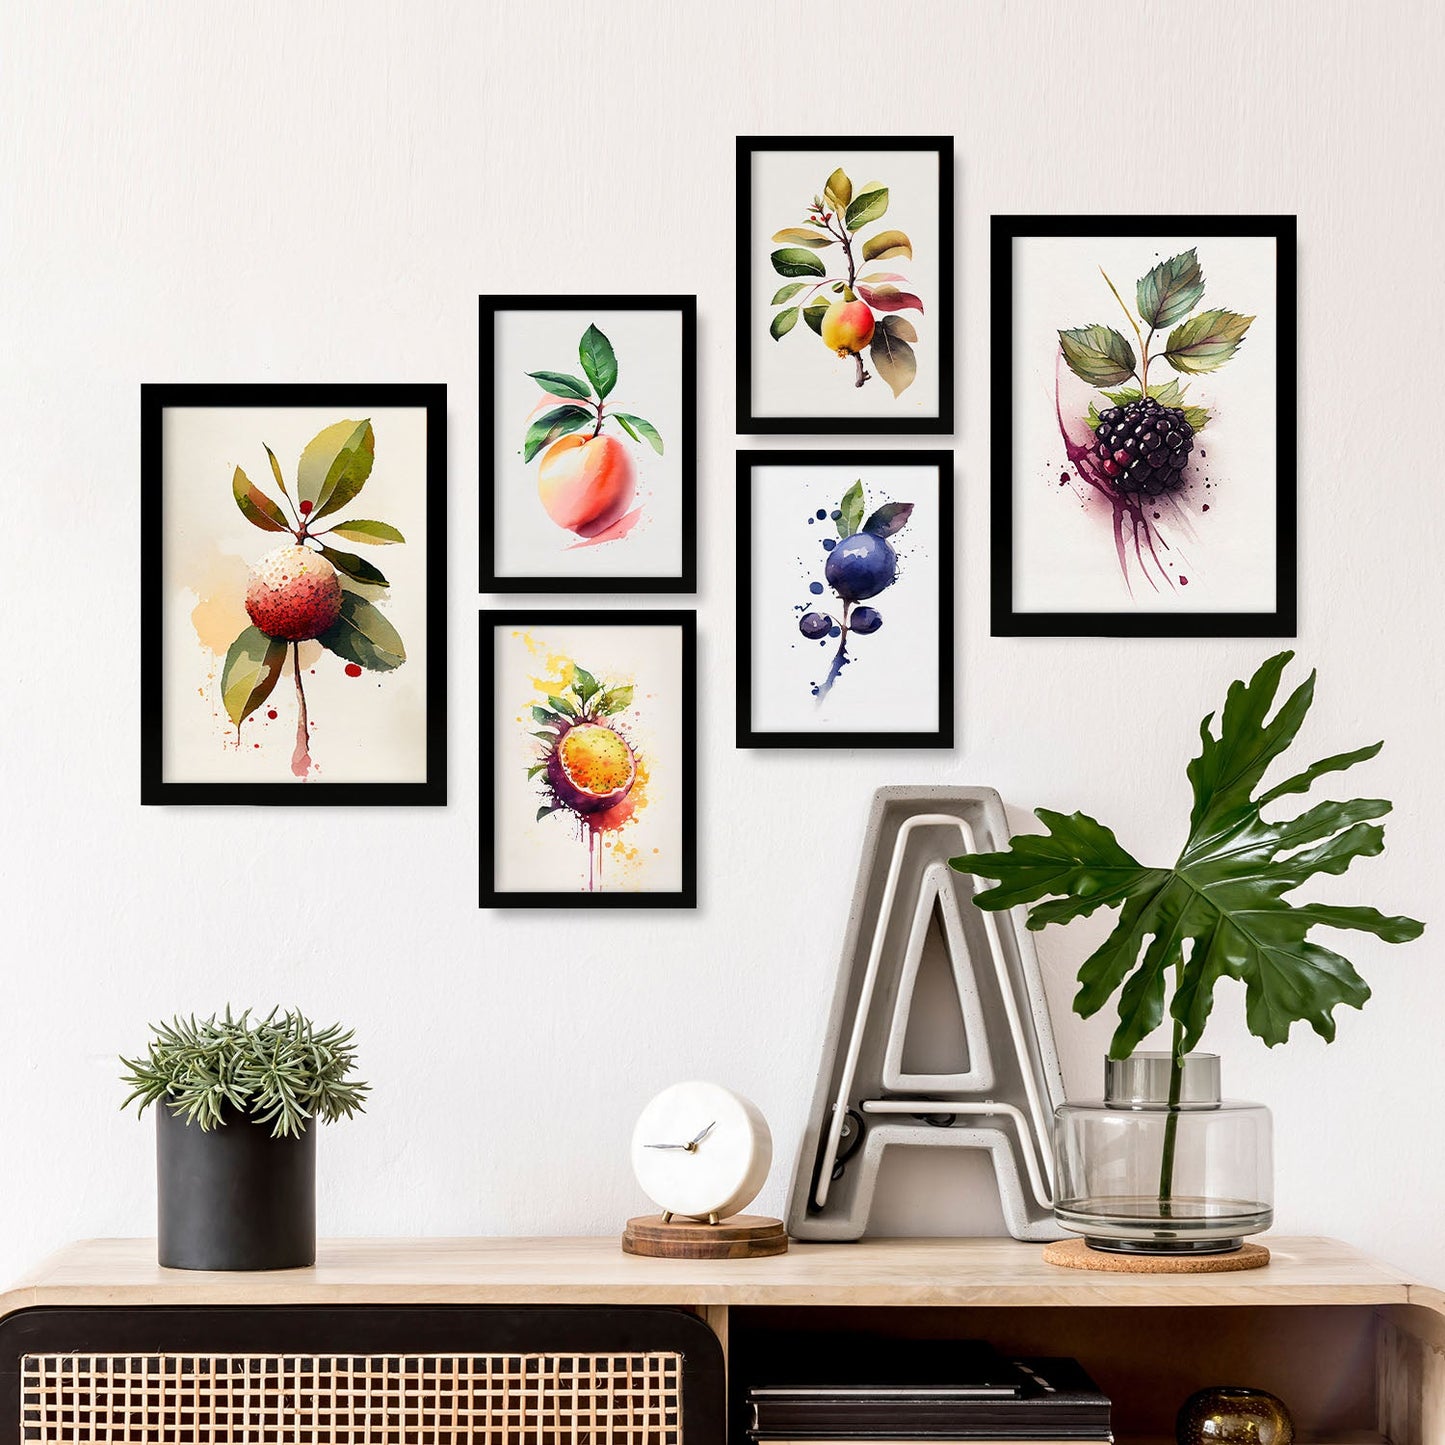 Nacnic Watercolor Fruits Set_09. Aesthetic Wall Art Prints for Bedroom or Living Room Design.